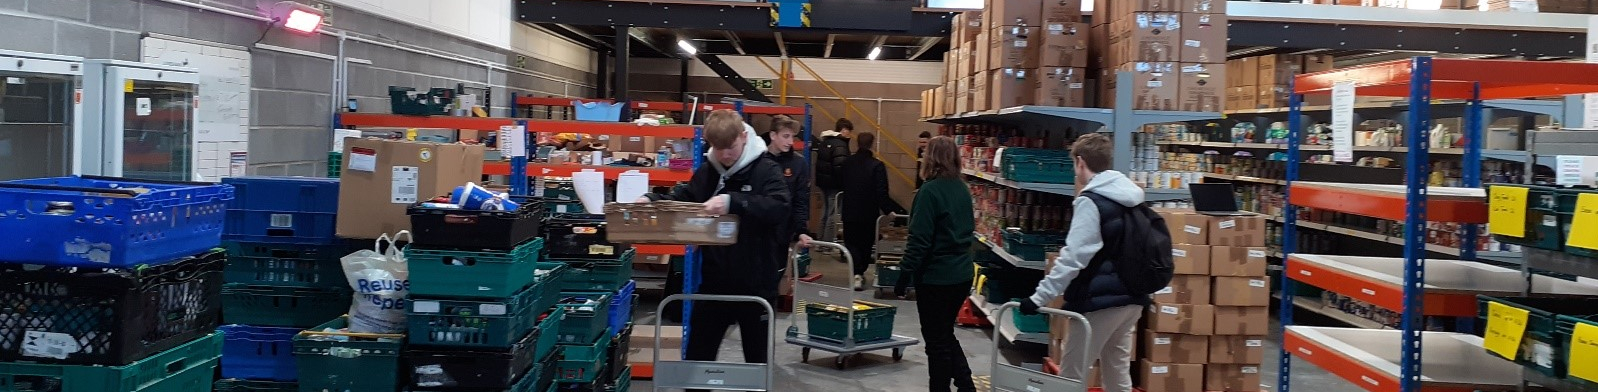 Learners stocking food onto trolleys in a warehouse